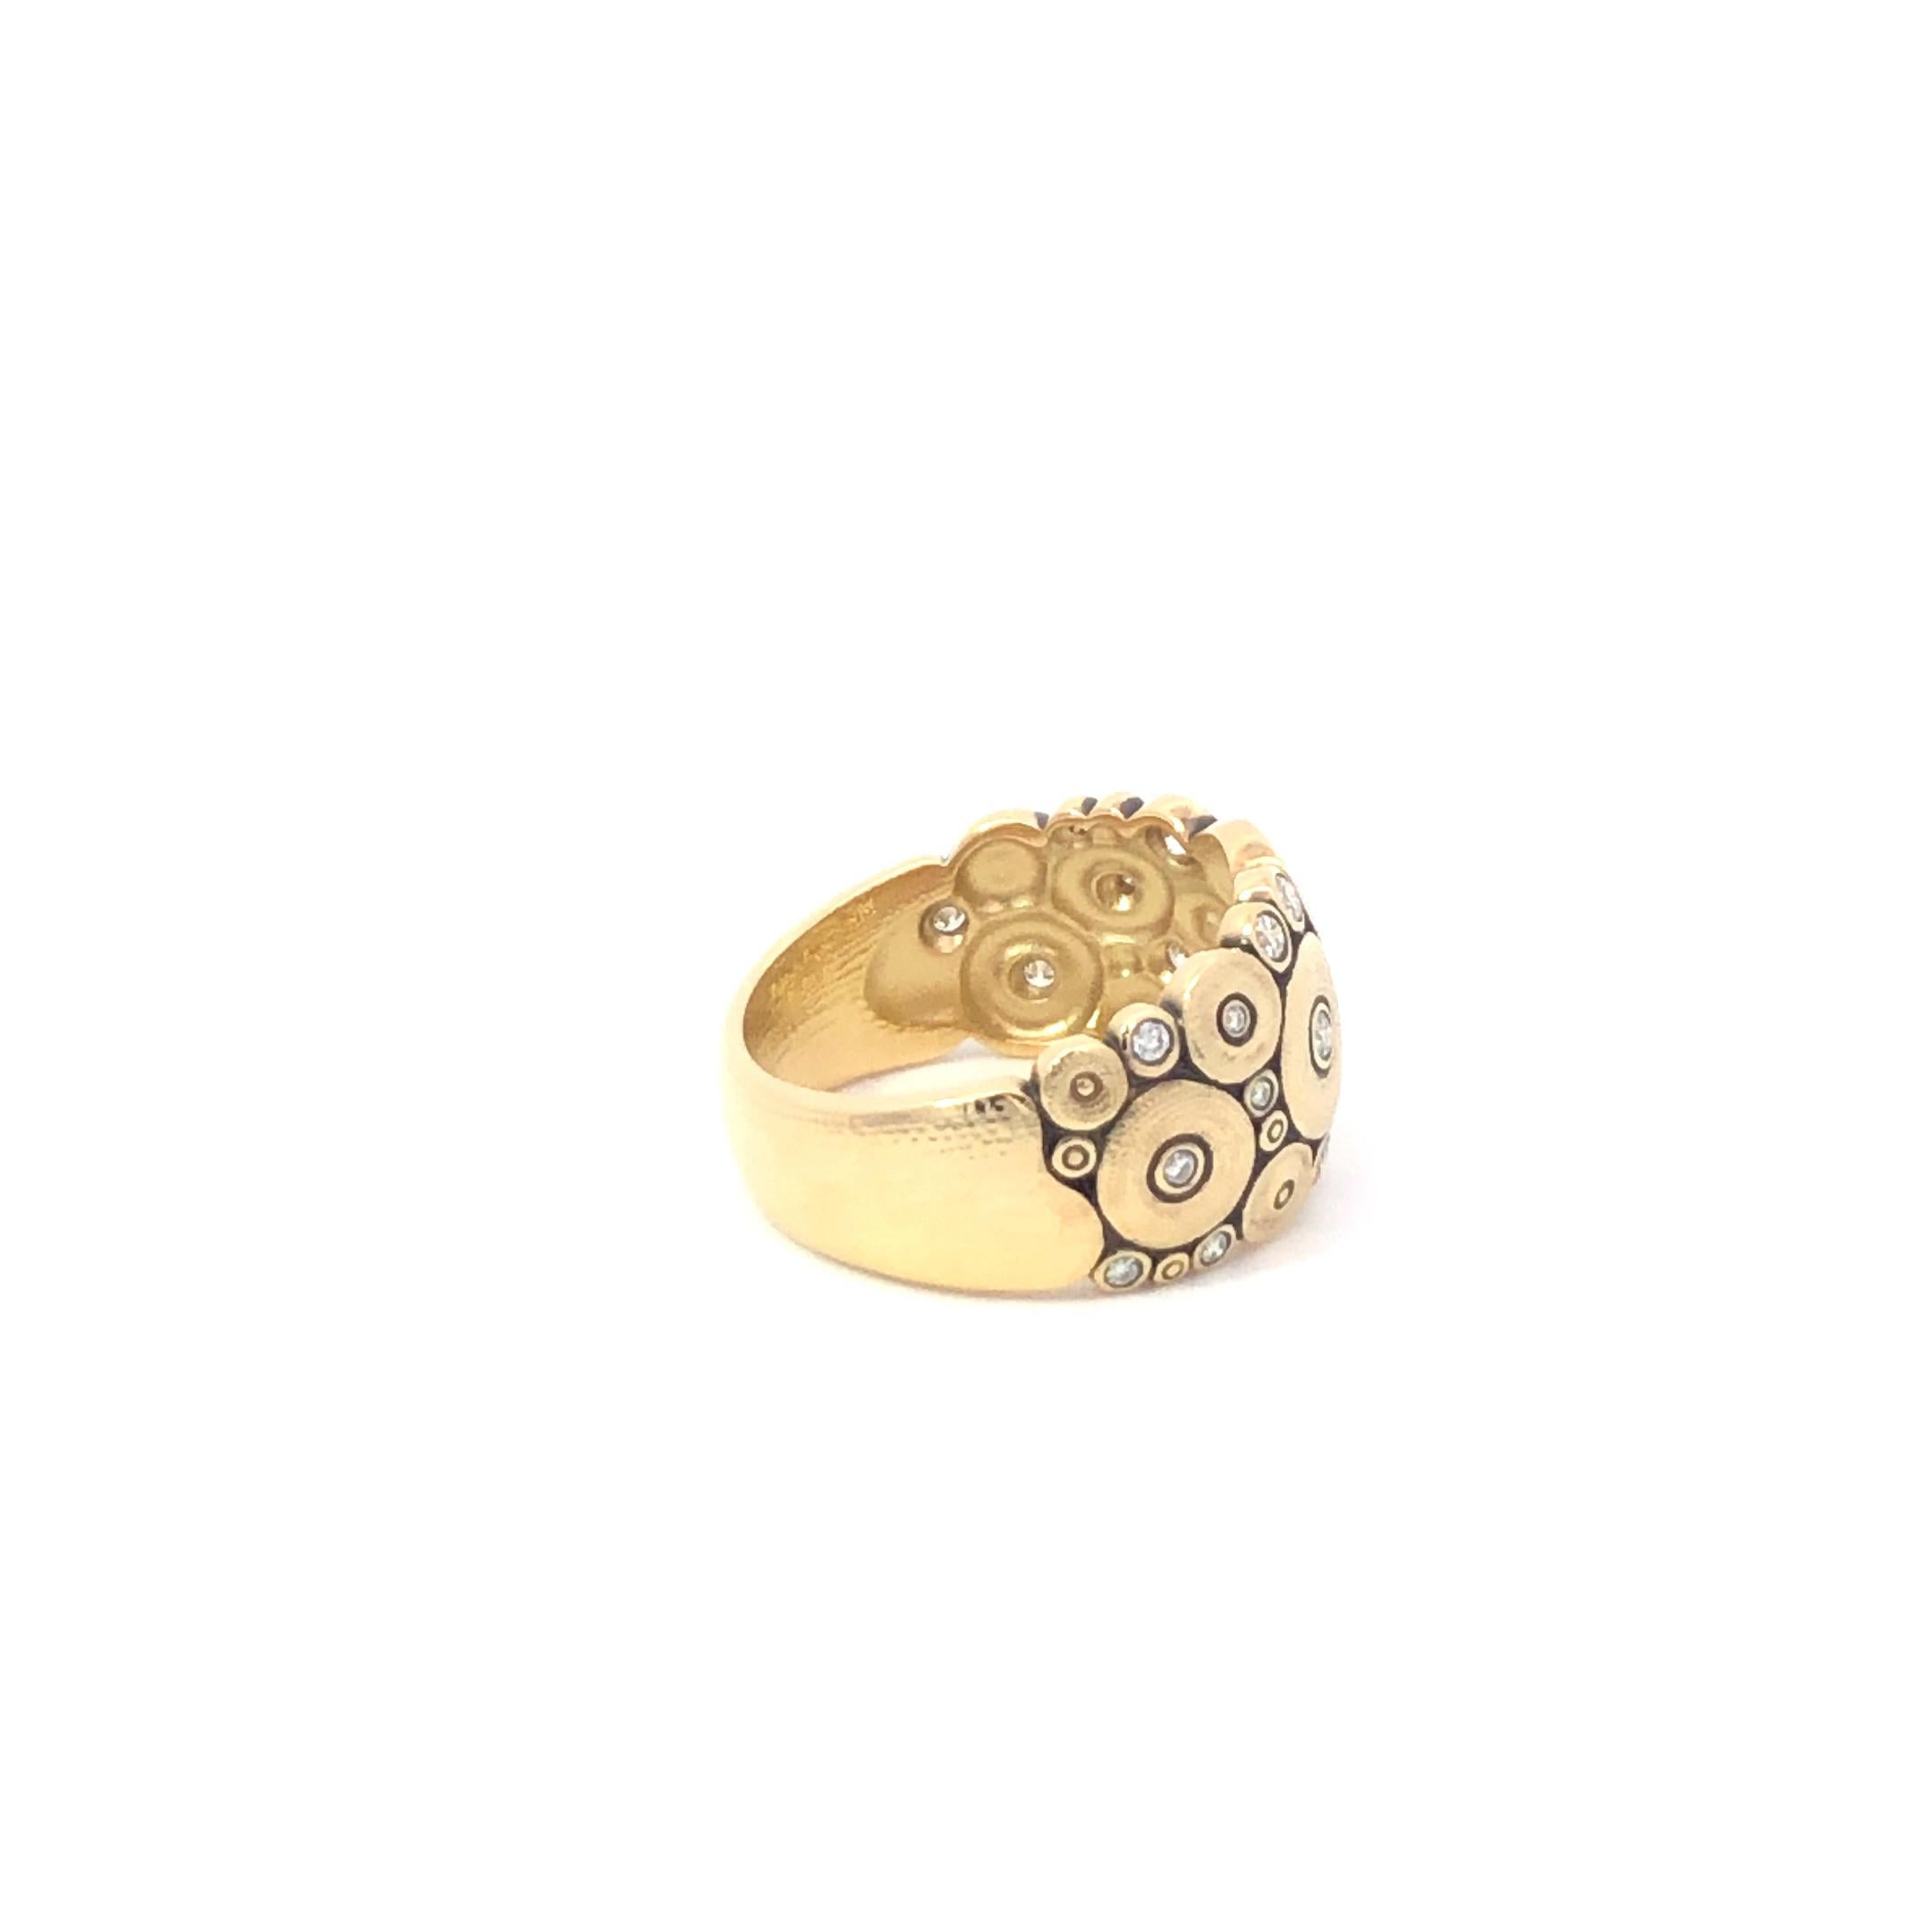 Alex Sepkus 'Ocean' White Diamond Ring 18K Yellow Gold In New Condition For Sale In Dallas, TX